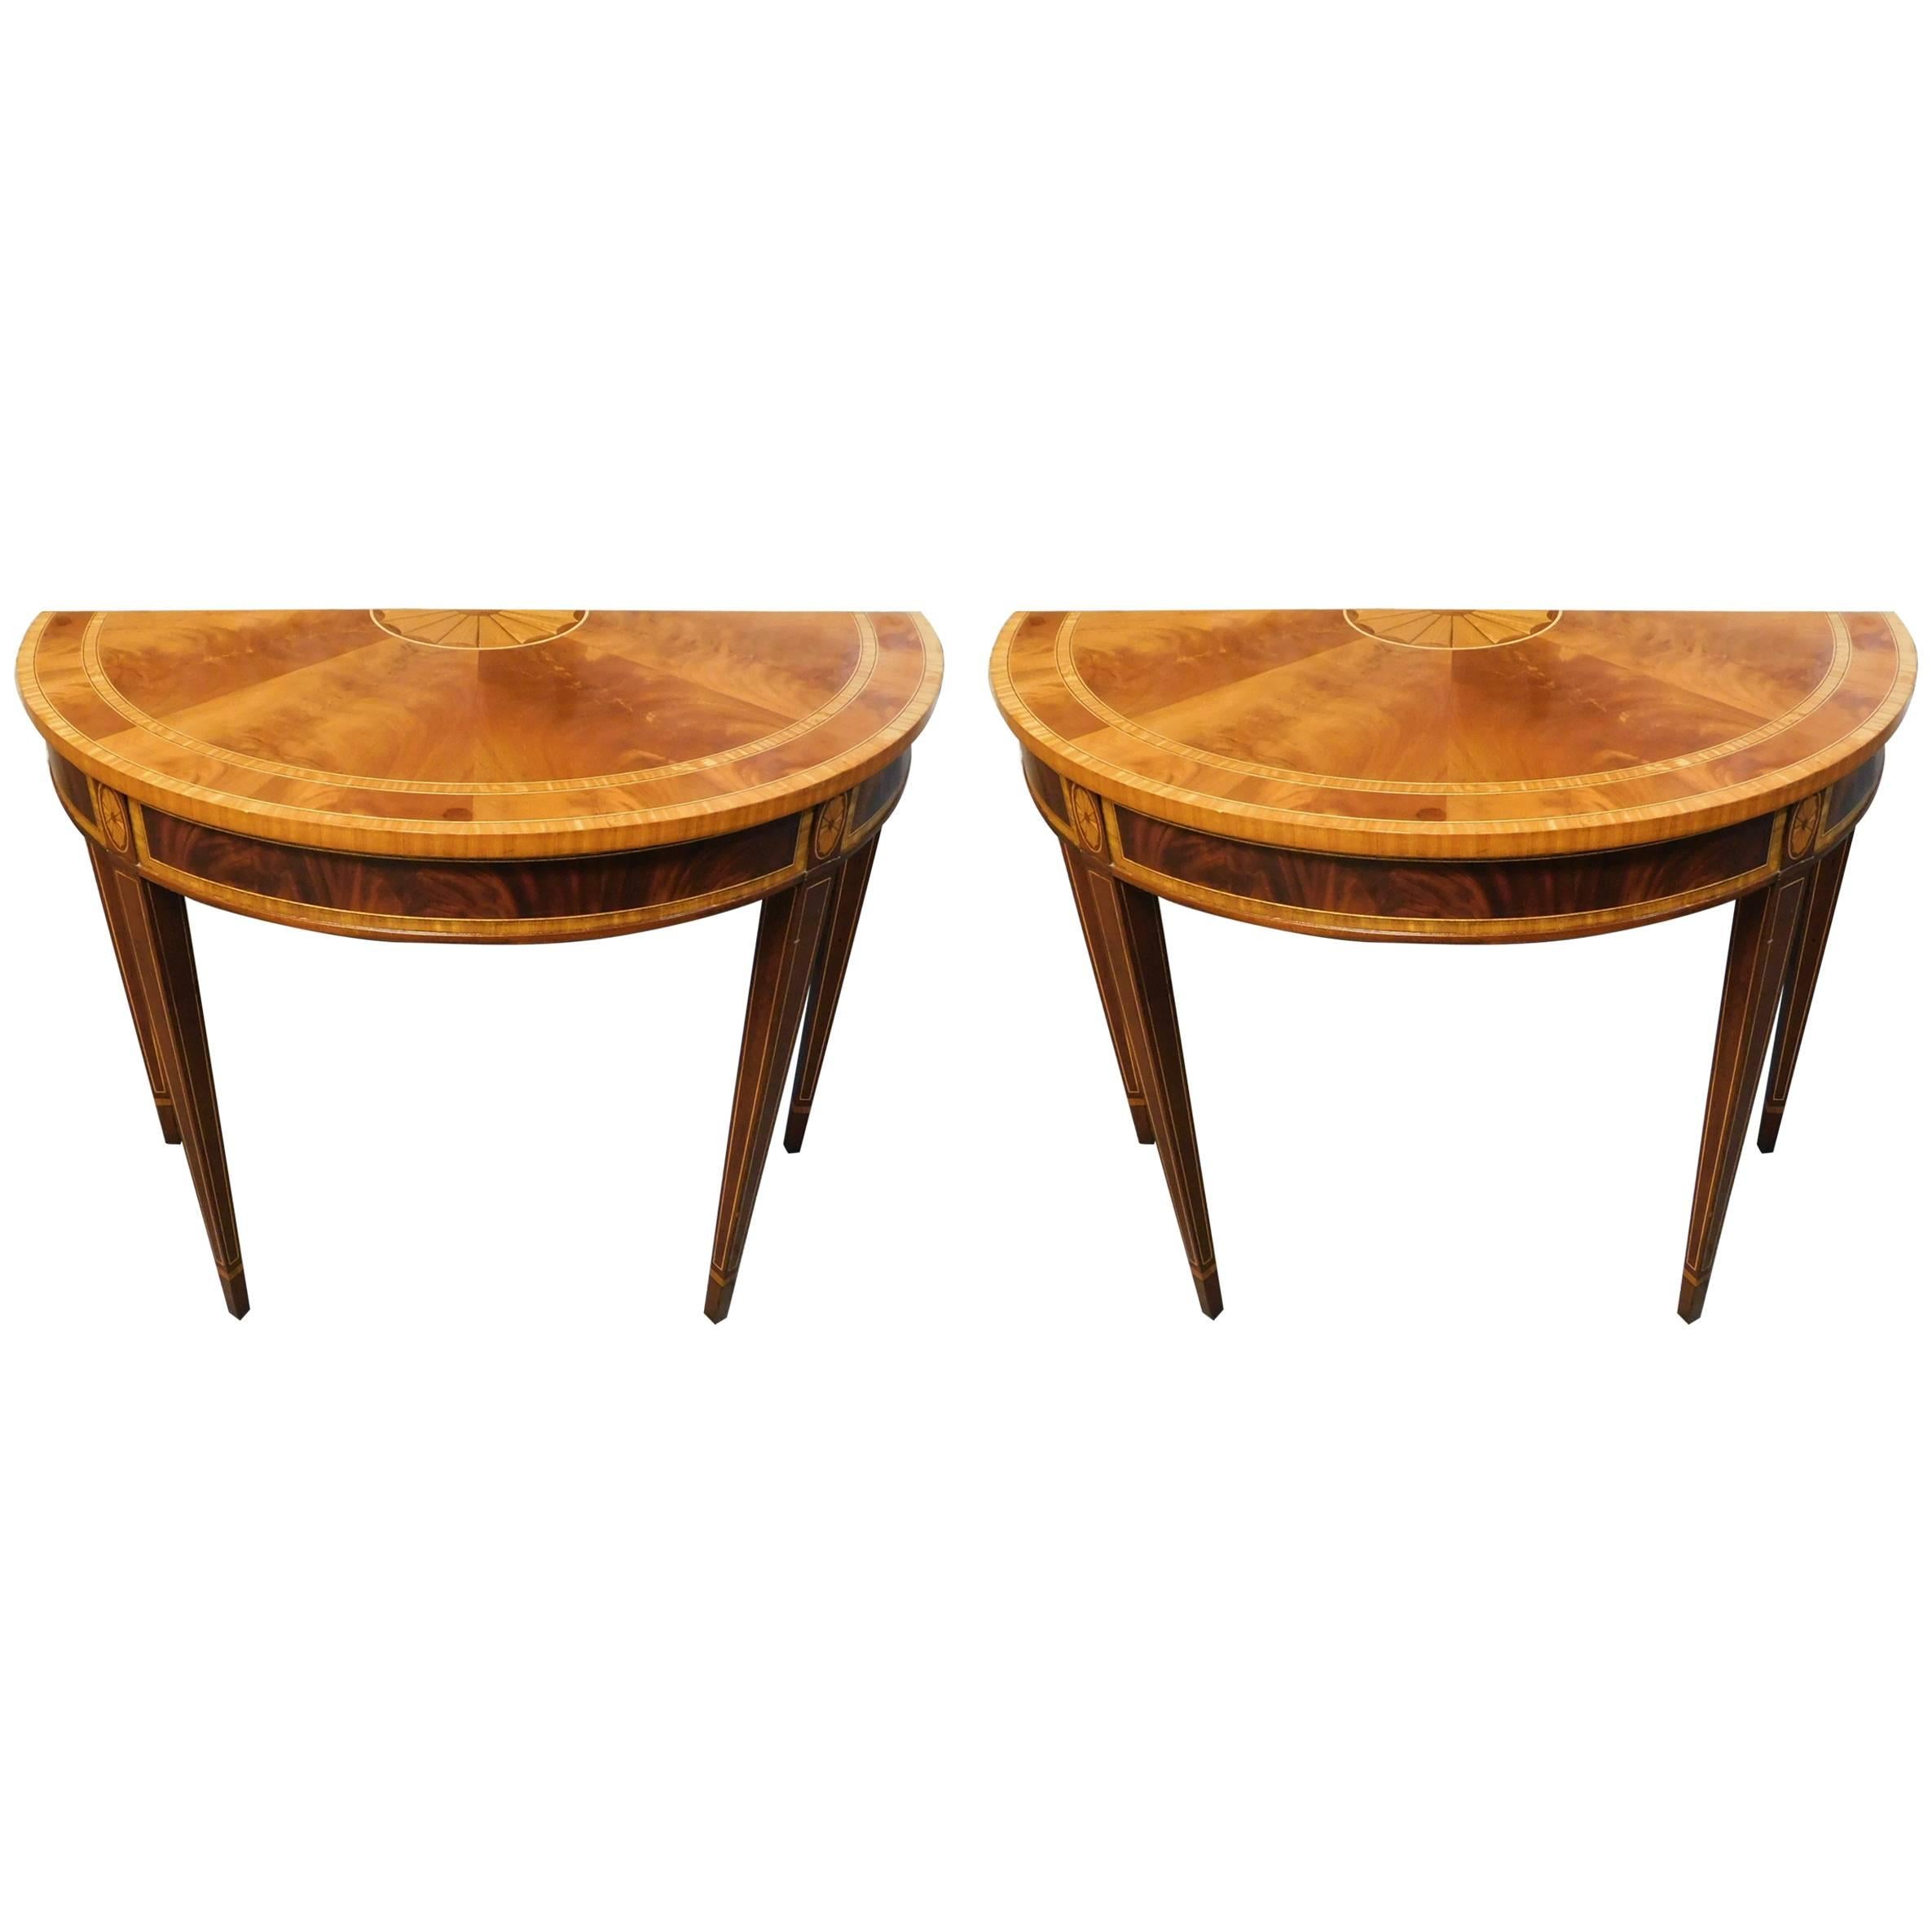 Pair of Councill Craftsman Half Moon Inlaid Tables